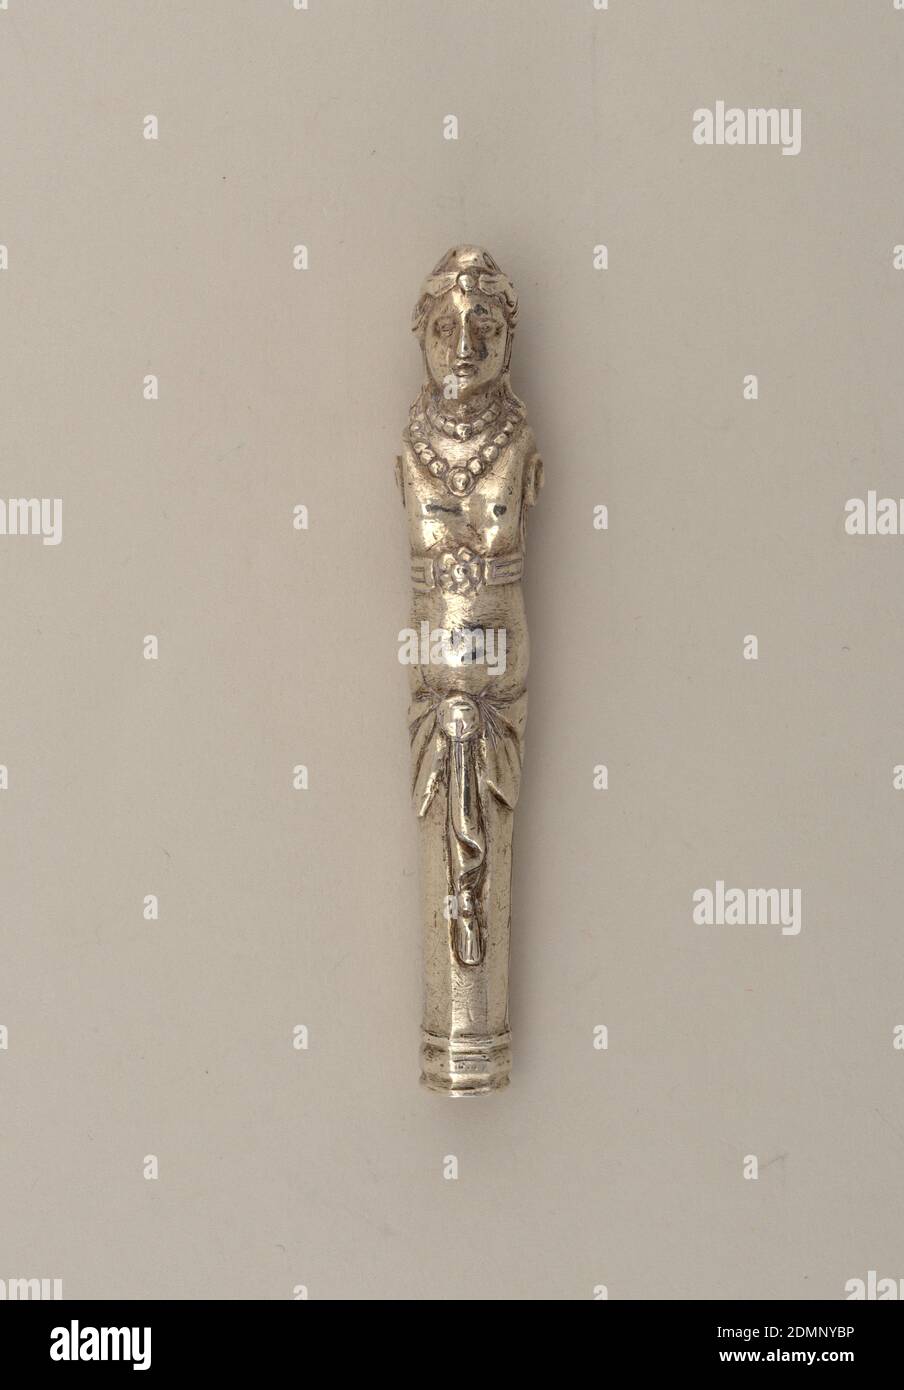 Handle, Silver, Handle in the shape of female caryatids, handle can be screwed on implement, probably Italy, late 17th century, cutlery, Decorative Arts, Handle Stock Photo